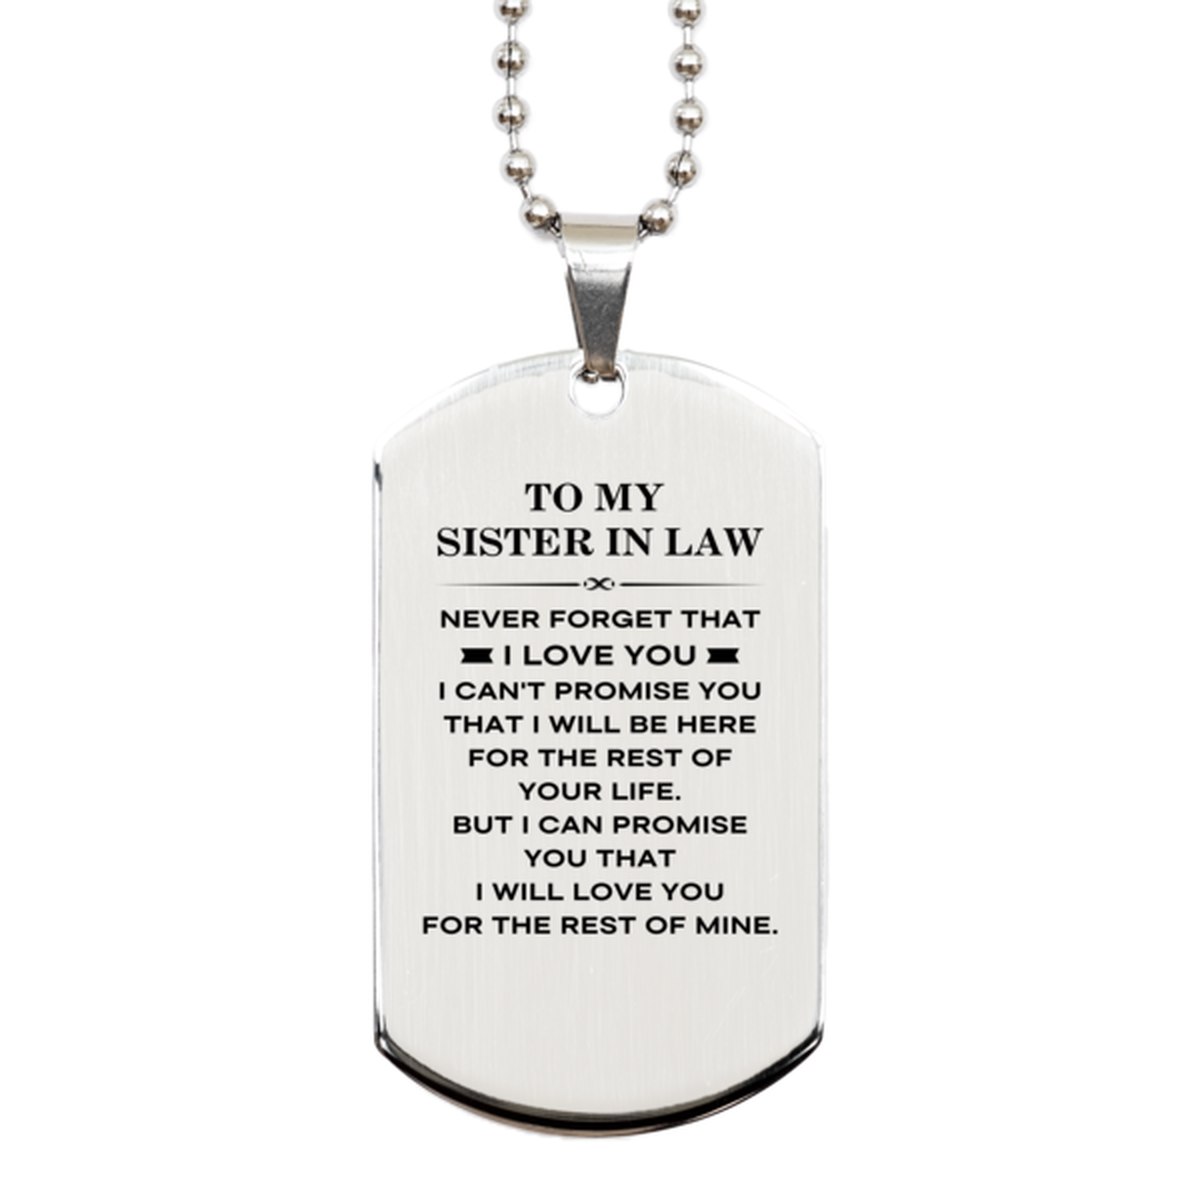 To My Sister In Law Gifts, I will love you for the rest of mine, Love Sister In Law Dog Tag Necklace, Birthday Christmas Unique Silver Dog Tag For Sister In Law